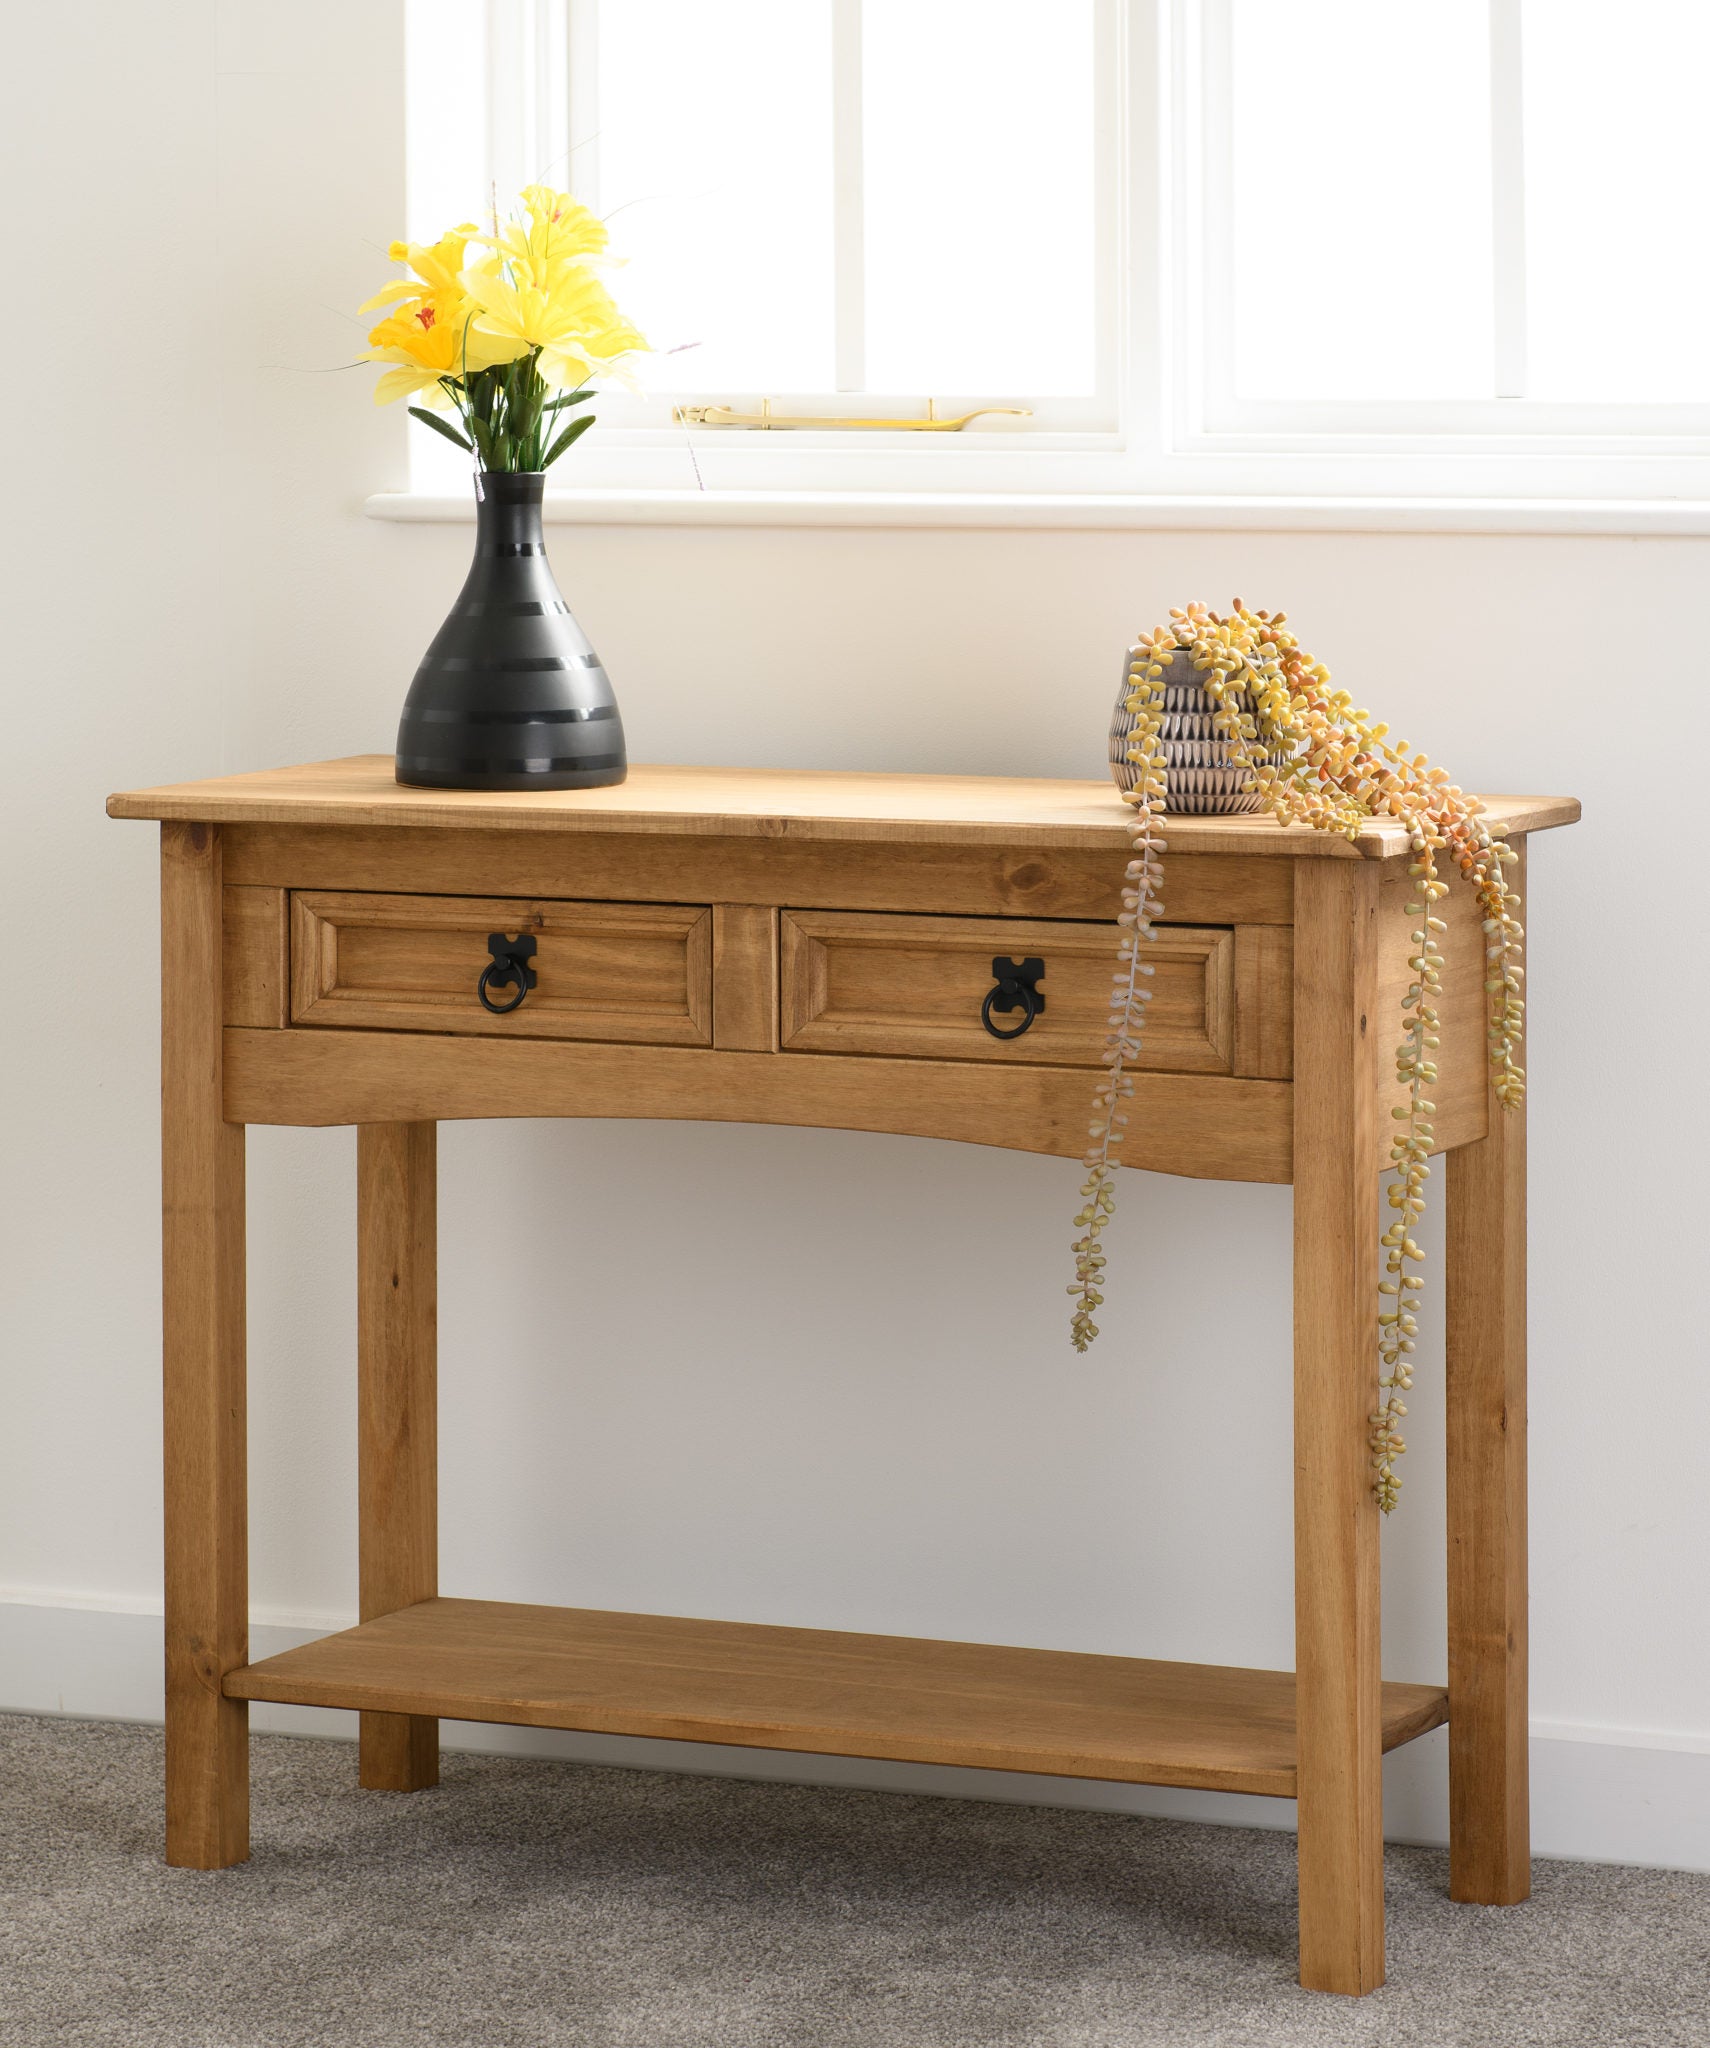 Corona 2 Drawer Console Table With Shelf- Distressed Waxed Pine